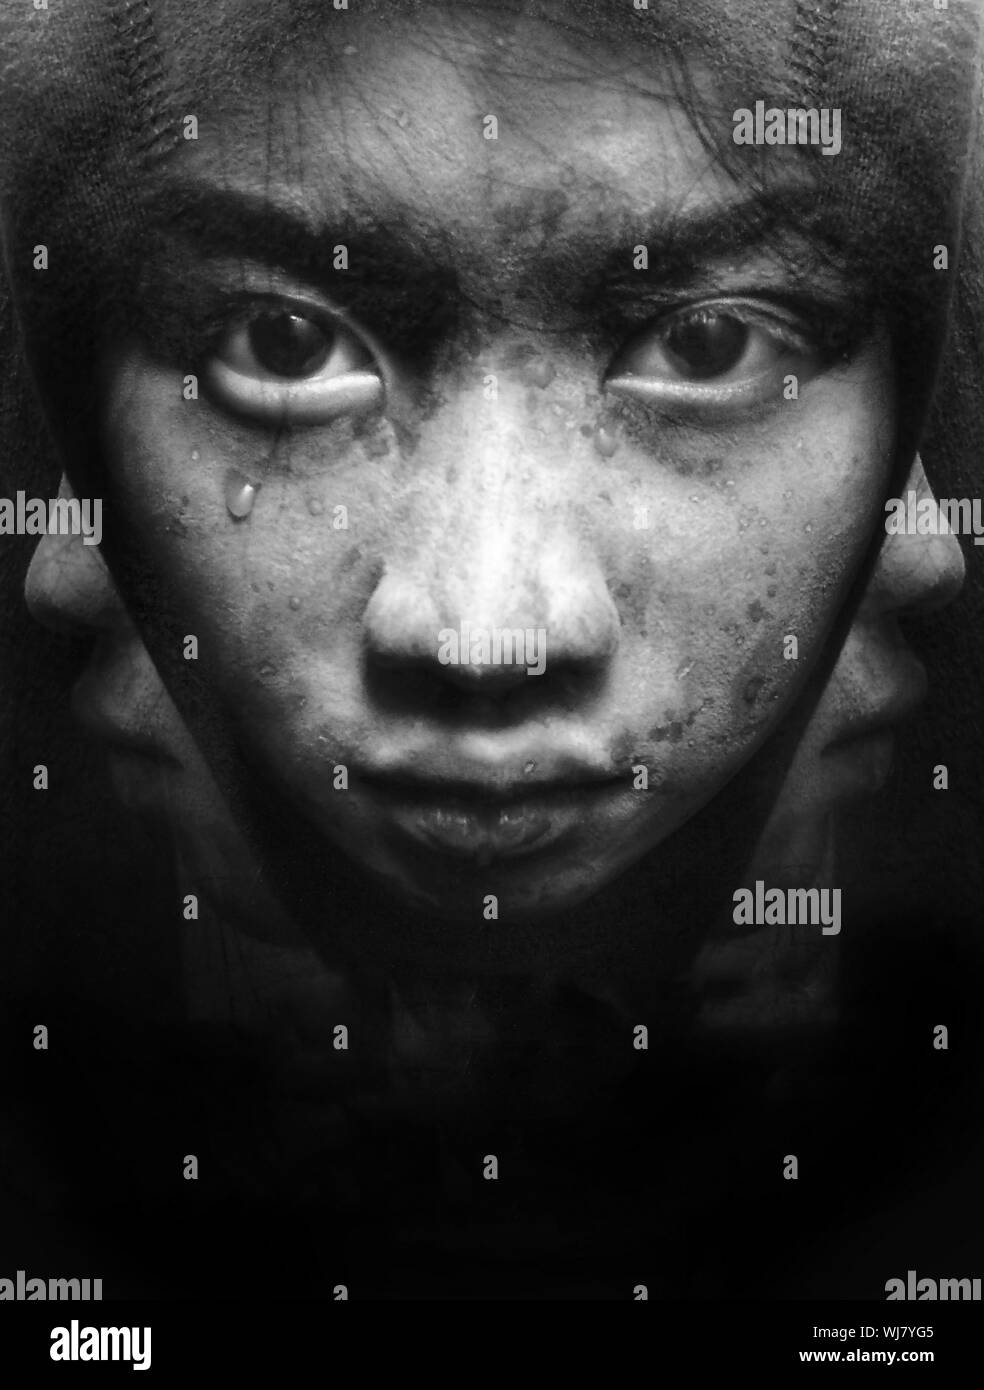 Digital Composite Image Of Teenage Boy With Teardrop Against Black Background Stock Photo